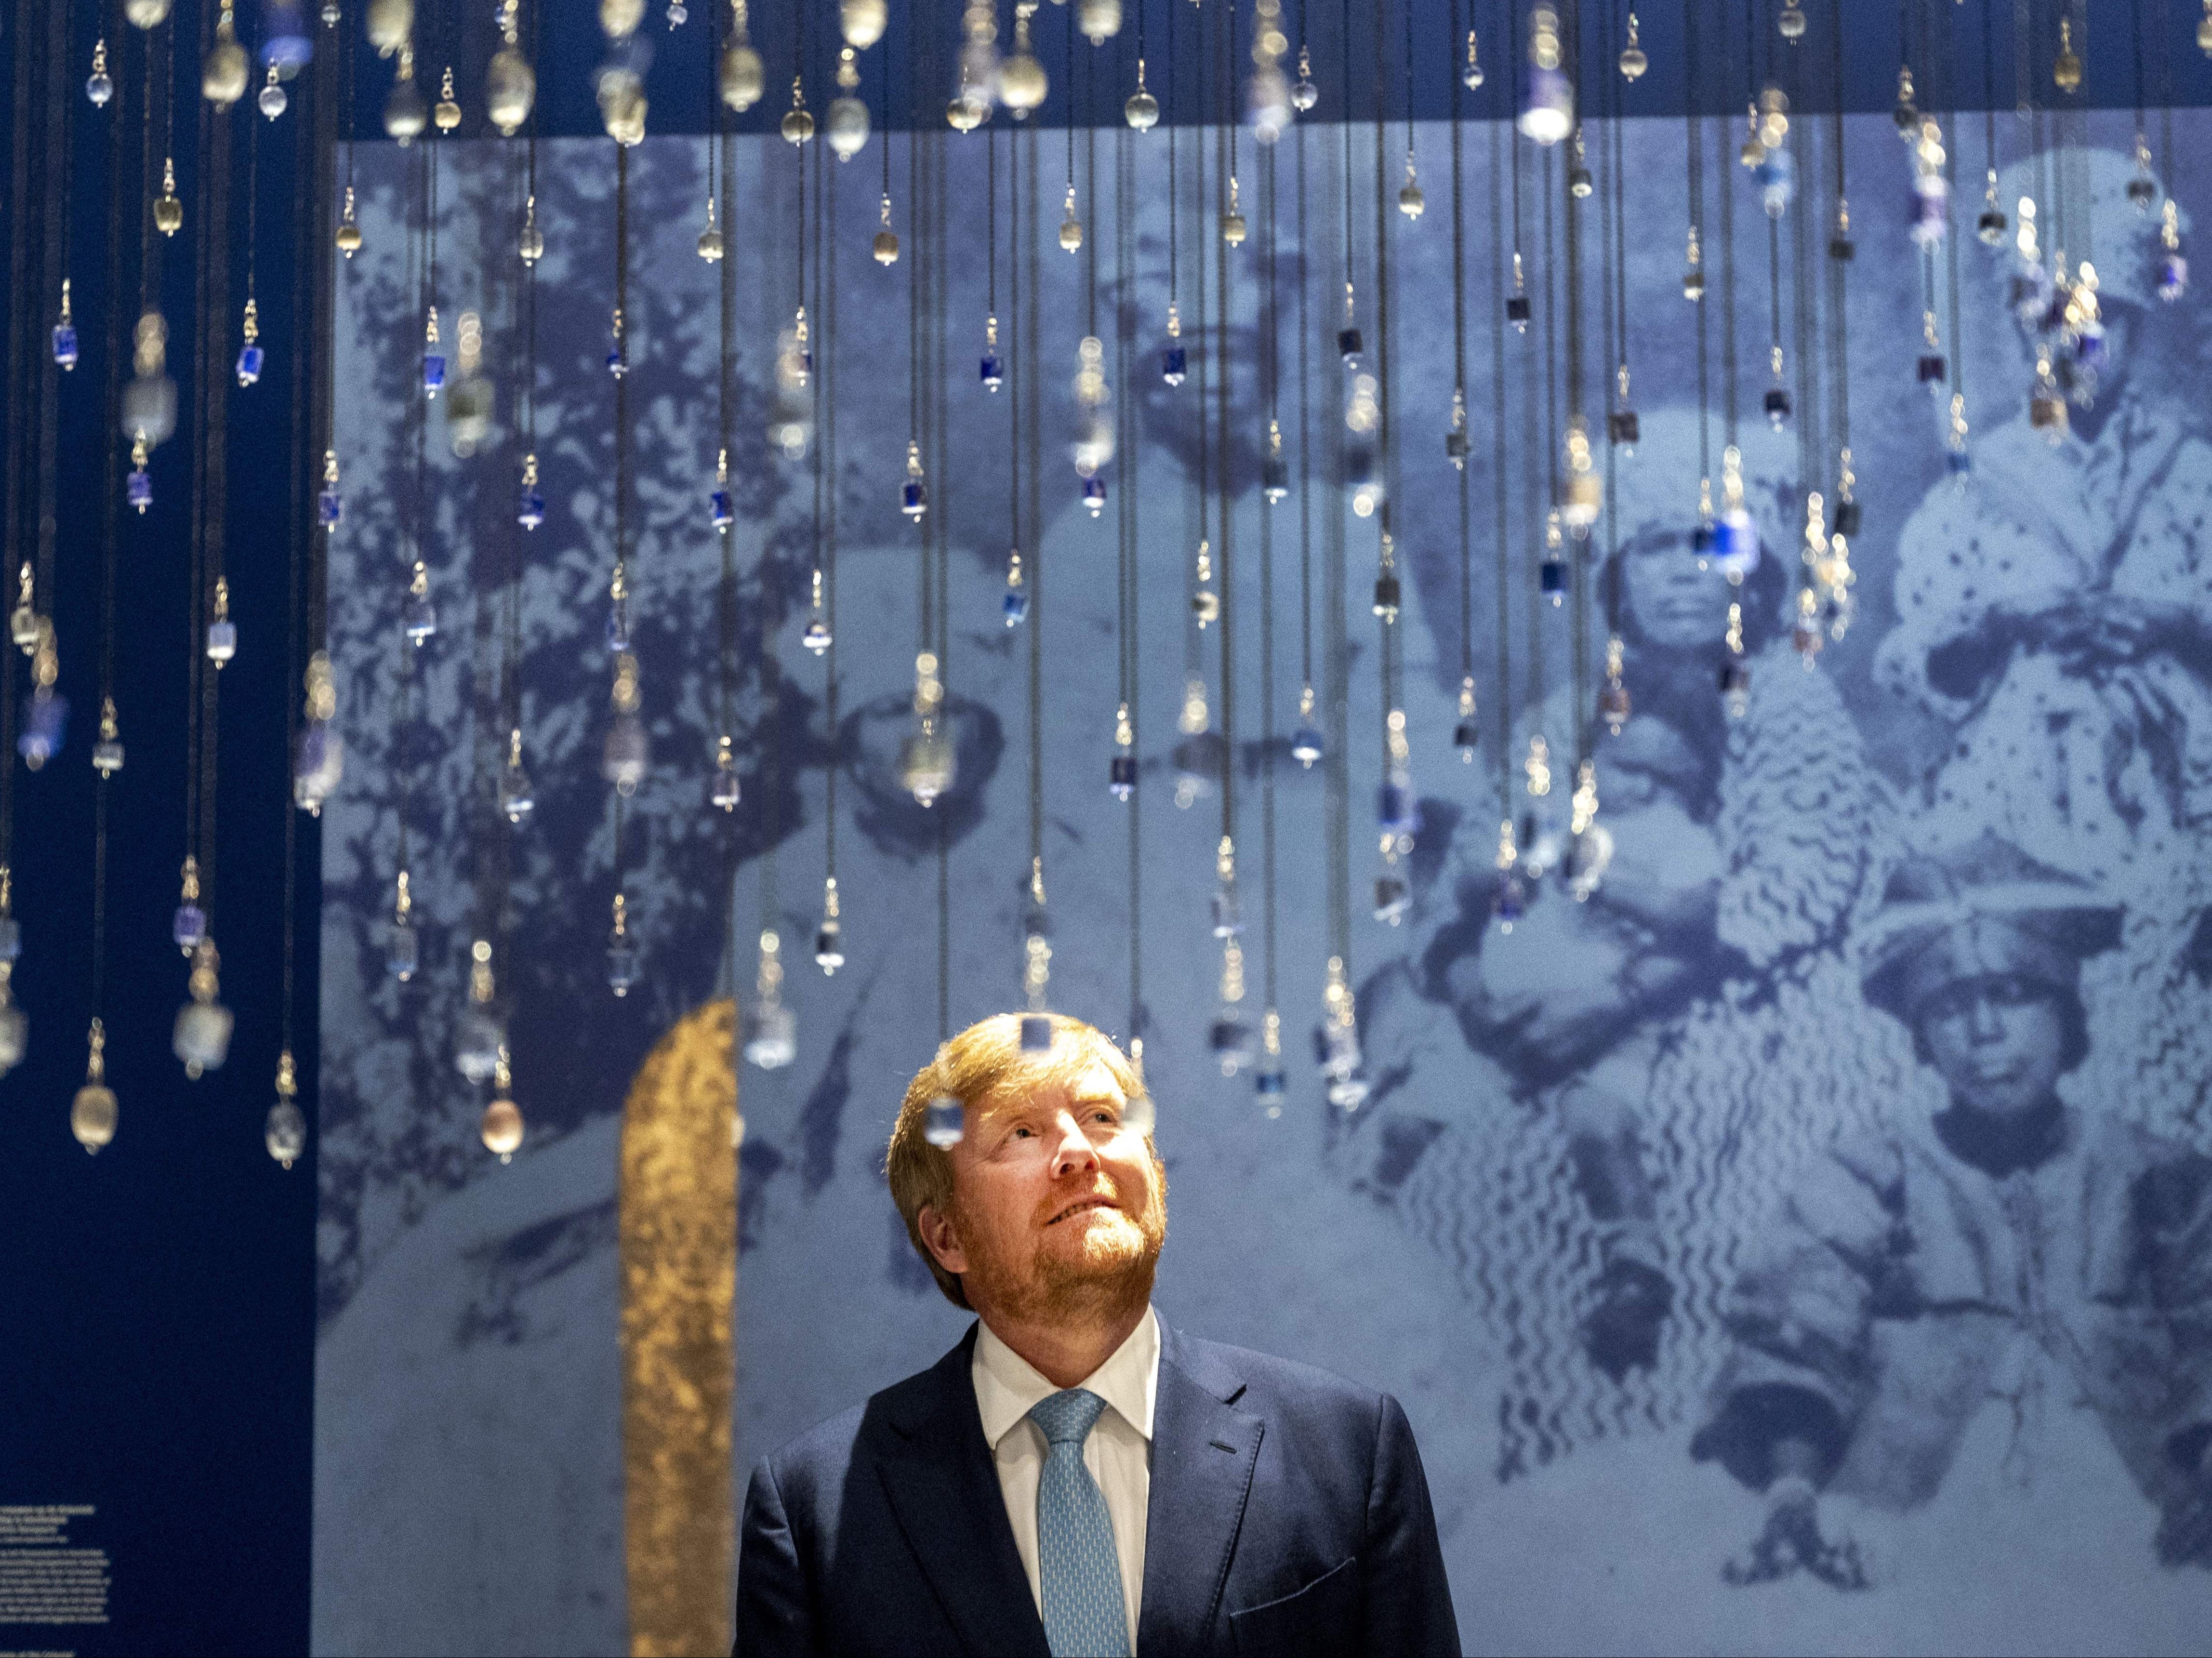 King Willem-Alexander looks on during the opening of the Slavery exhibition at the Rijksmuseum in Amsterdam on 18 May